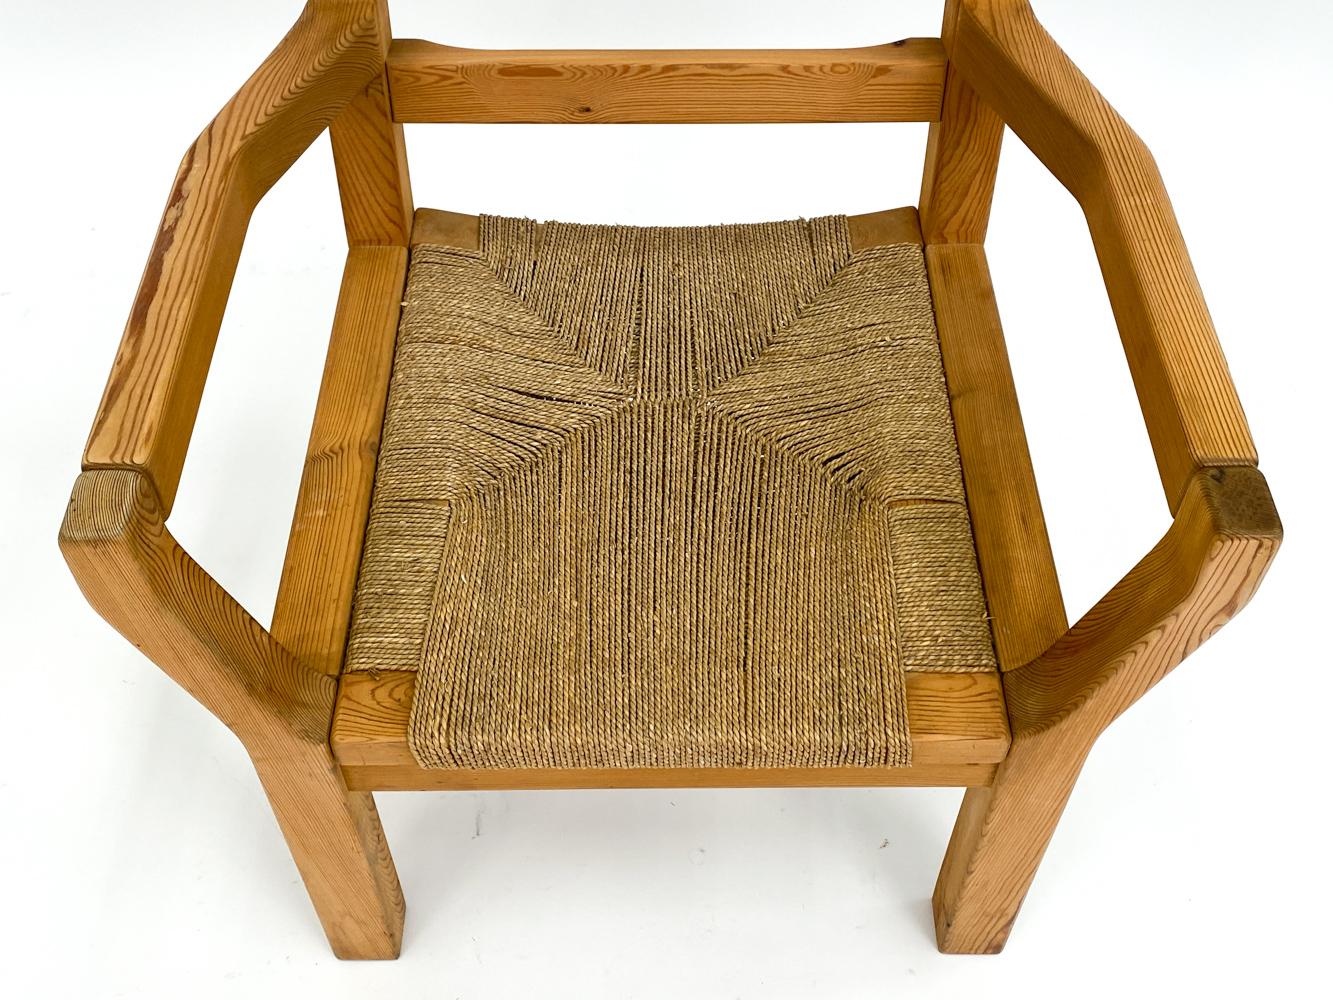 Pair of Tage Poulsen Pine & Rush Seat Lounge Chairs, c. 1970's For Sale 7